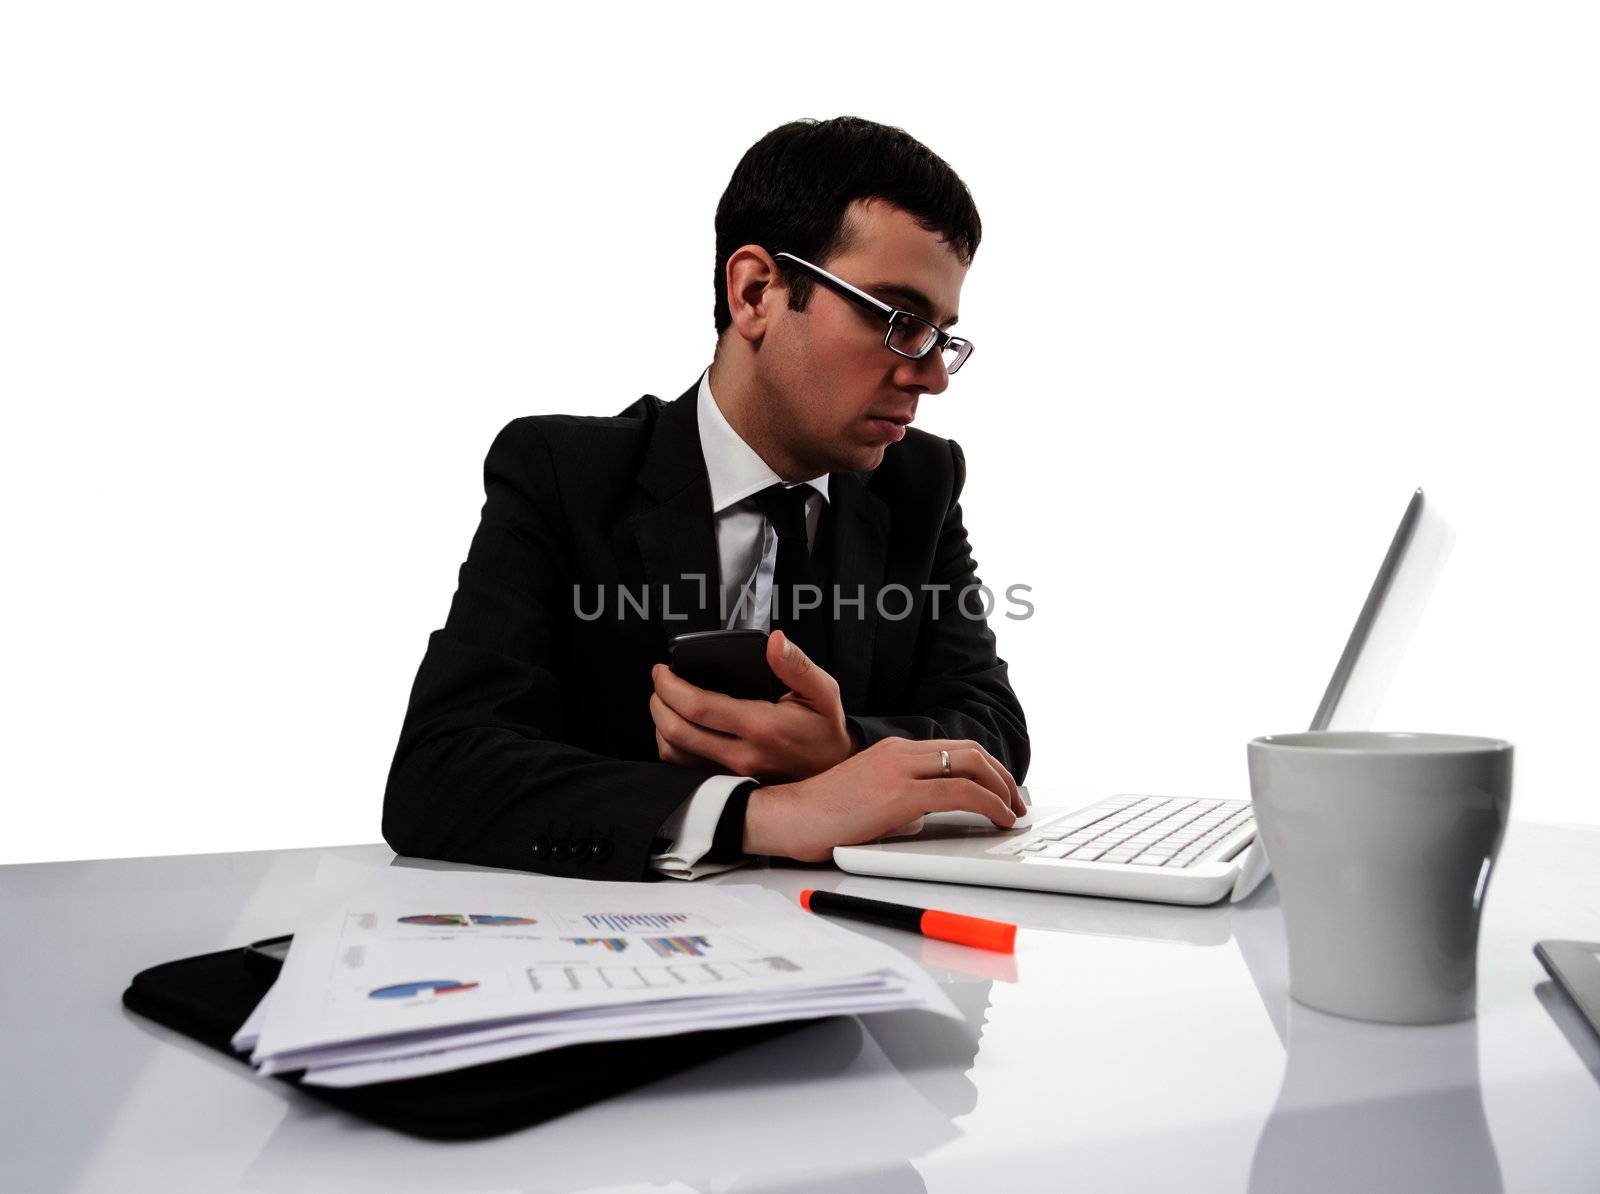 Young executive man working on laptop computer and holding a smartphone in the hand, over a white backgroud